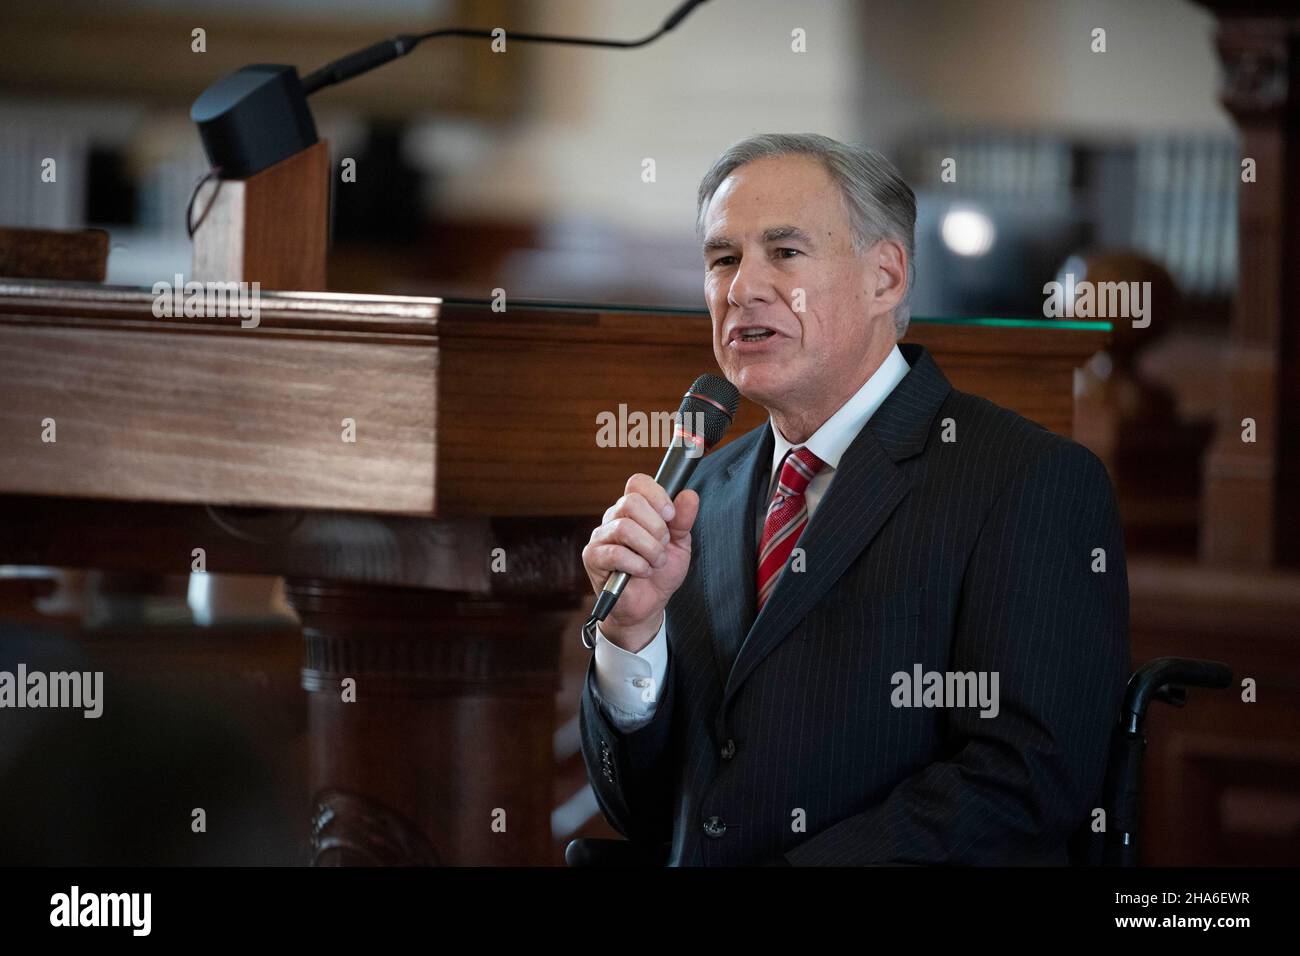 Austin Texas USA, Dec. 10 2021: Texas Gov. Greg Abbott speaks at an investiture ceremony for new Texas Supreme Court Justice Rebecca A. Huddle at the Texas Capitol. Huddle has been on the court for a year but her formal swearing-in ceremony was delayed due to COVID protocols. Credit: Bob Daemmrich/Alamy Live News Stock Photo